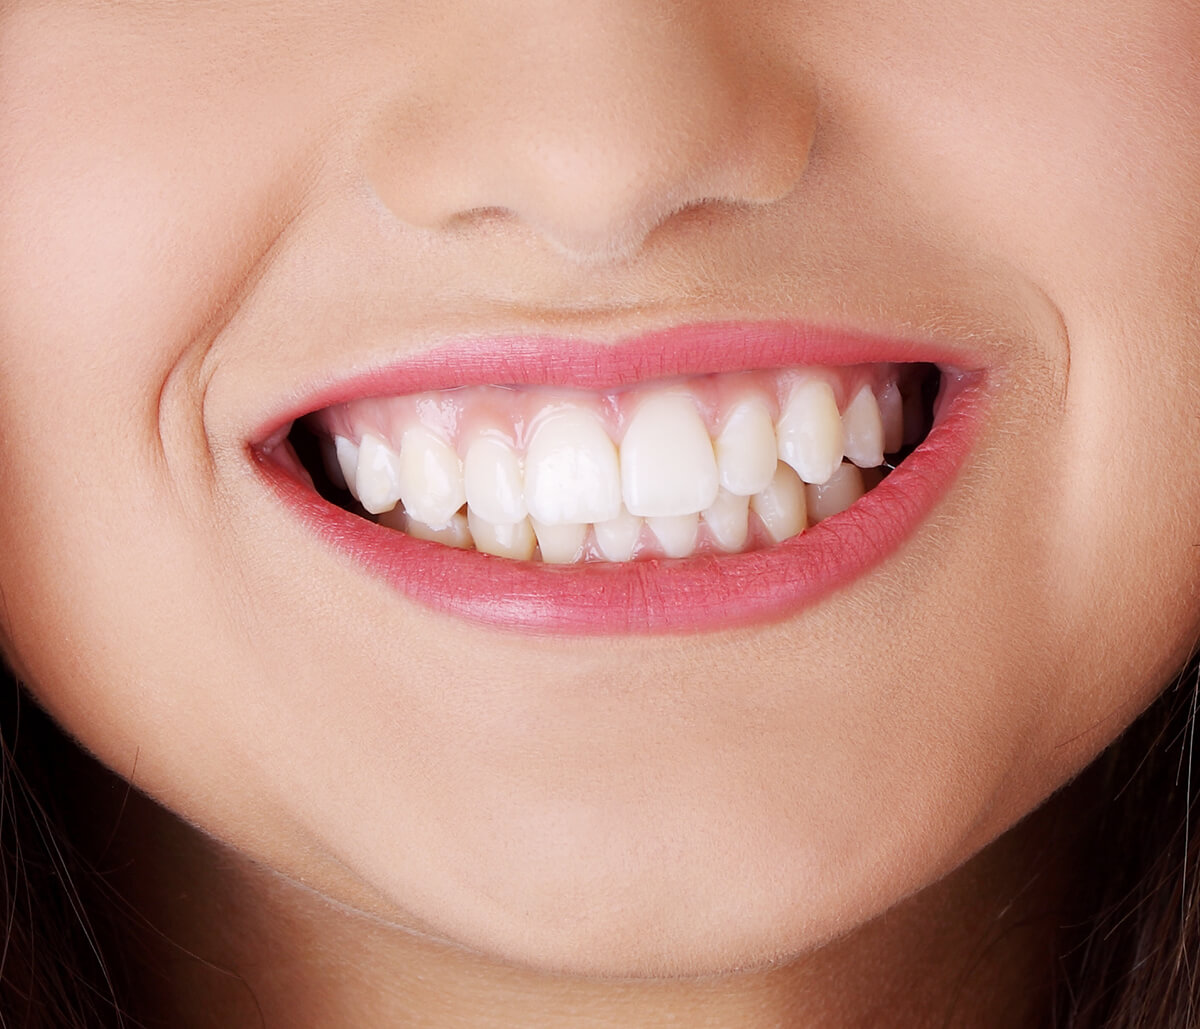 Professional Dental Whitening Treatment for Teeth Fort Worth TX Area